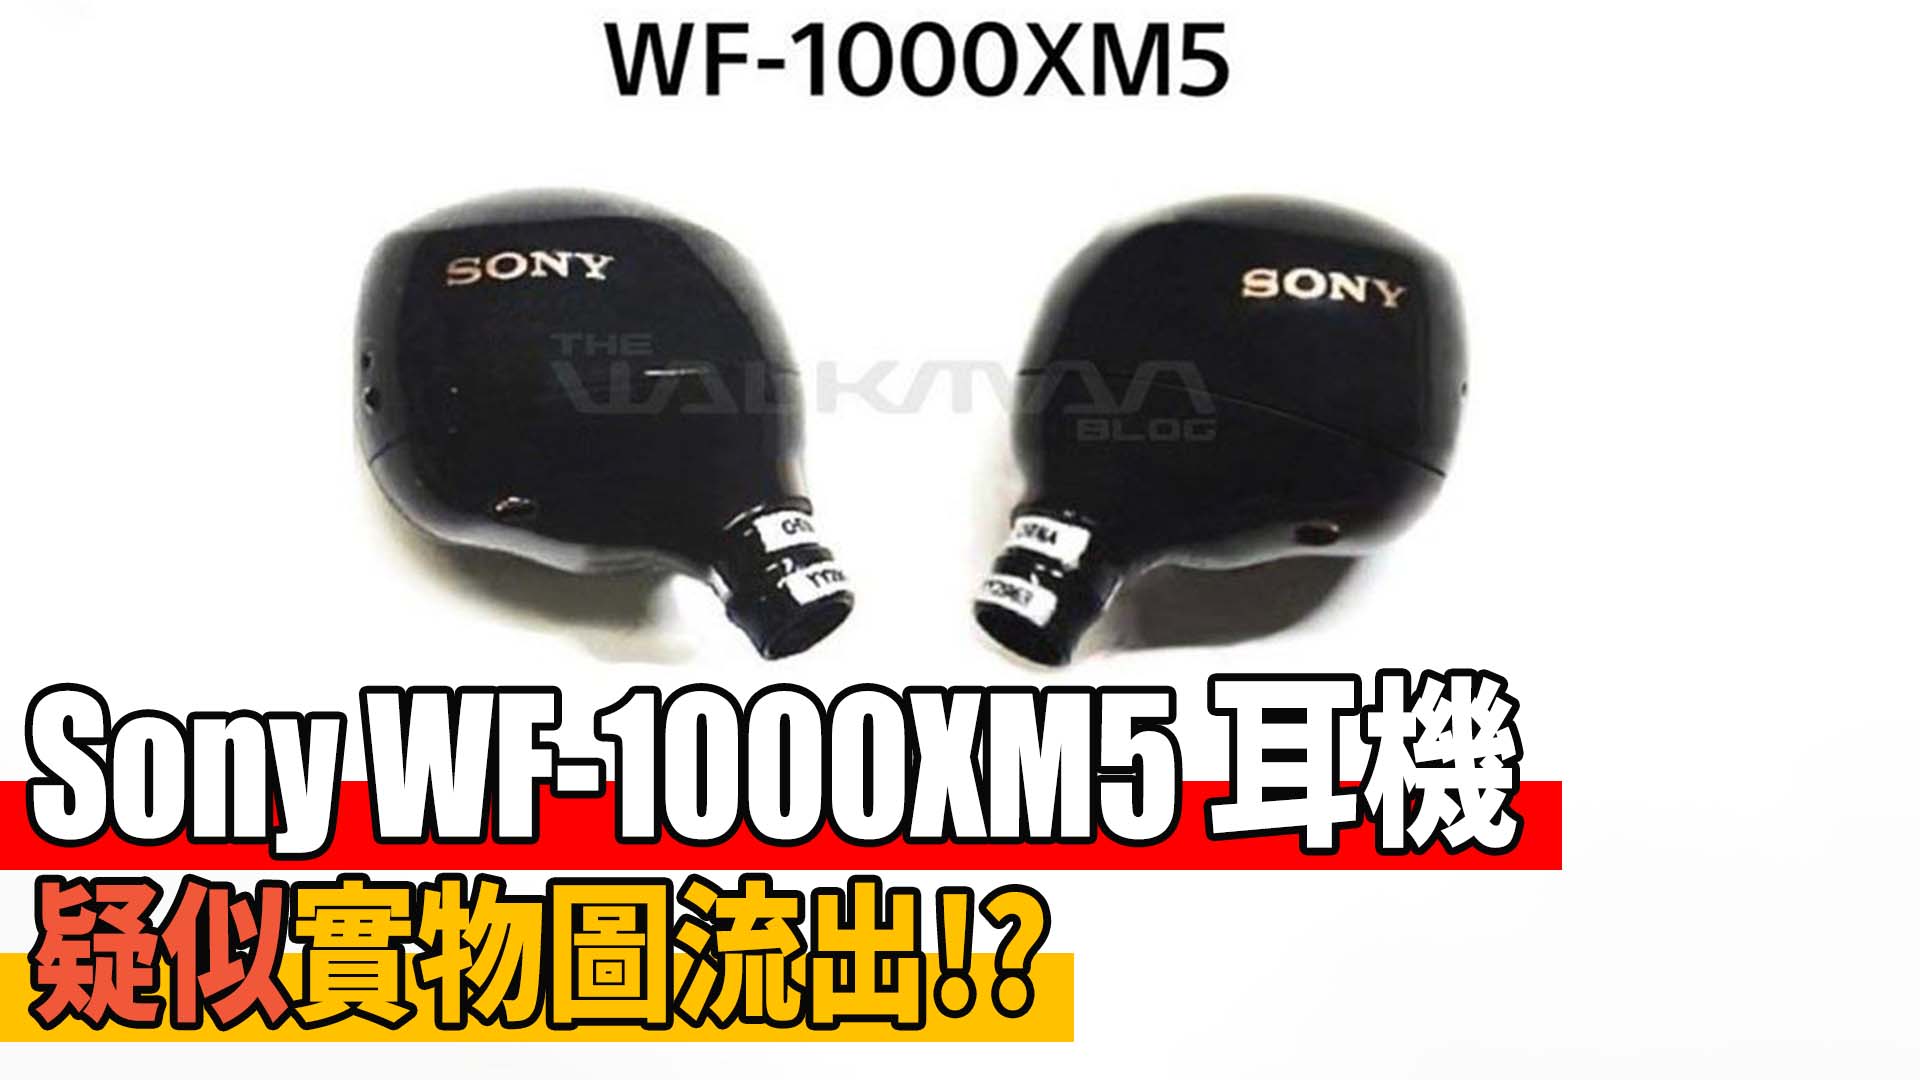 Sony WF-1000XM5 headphones are suspected to be out of real pictures!?｜Headphone Information | Post76 Fun Network